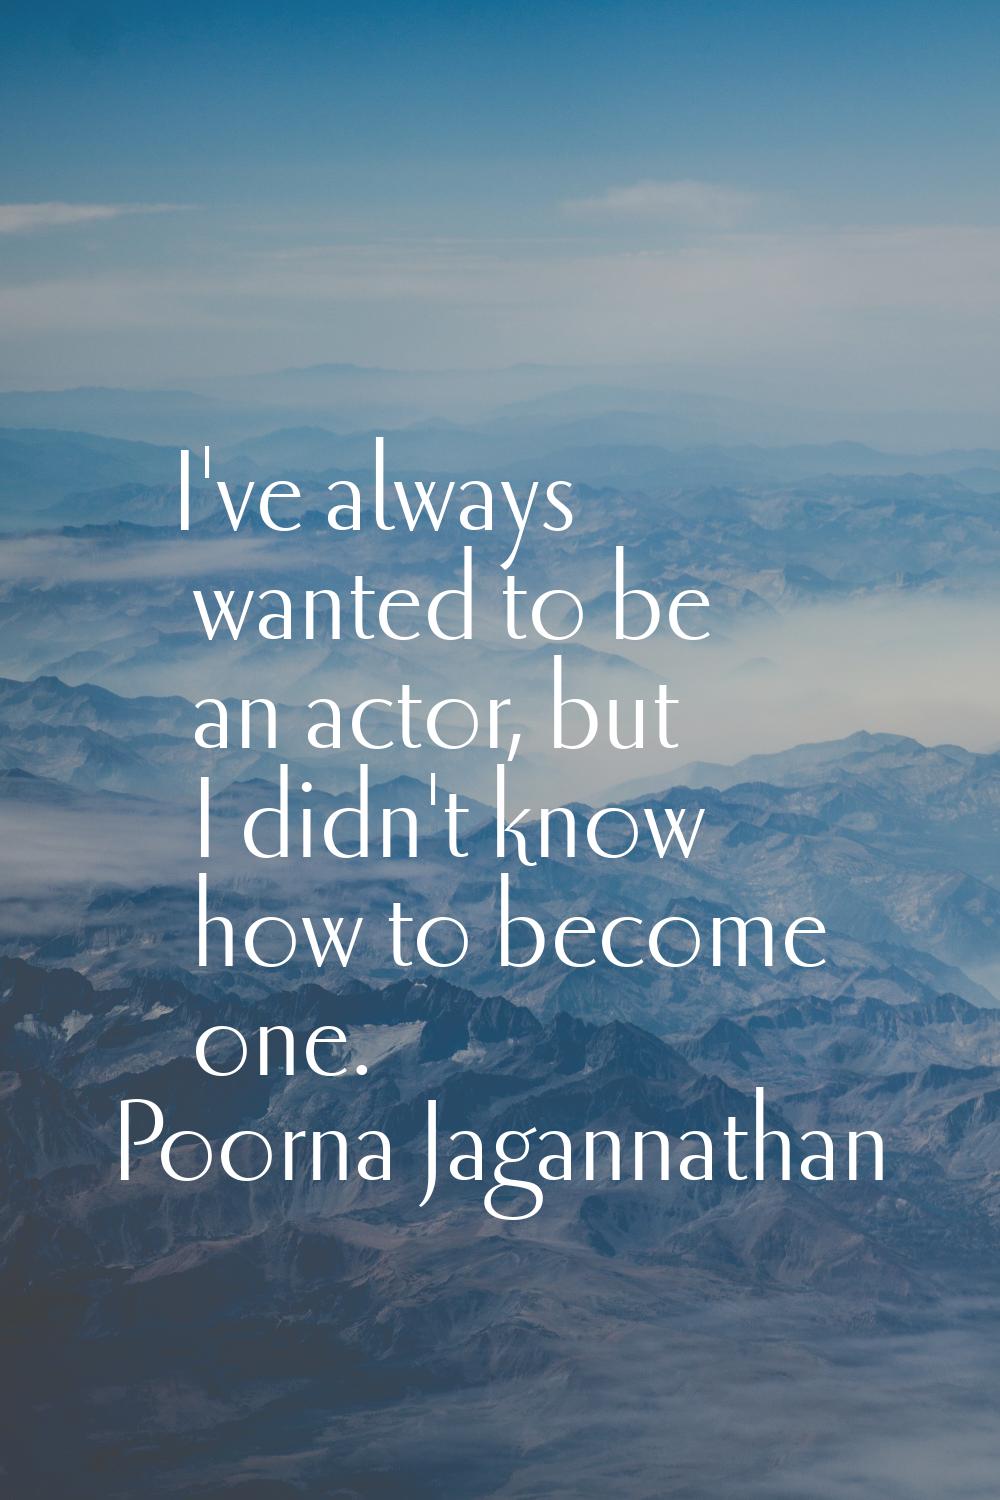 I've always wanted to be an actor, but I didn't know how to become one.